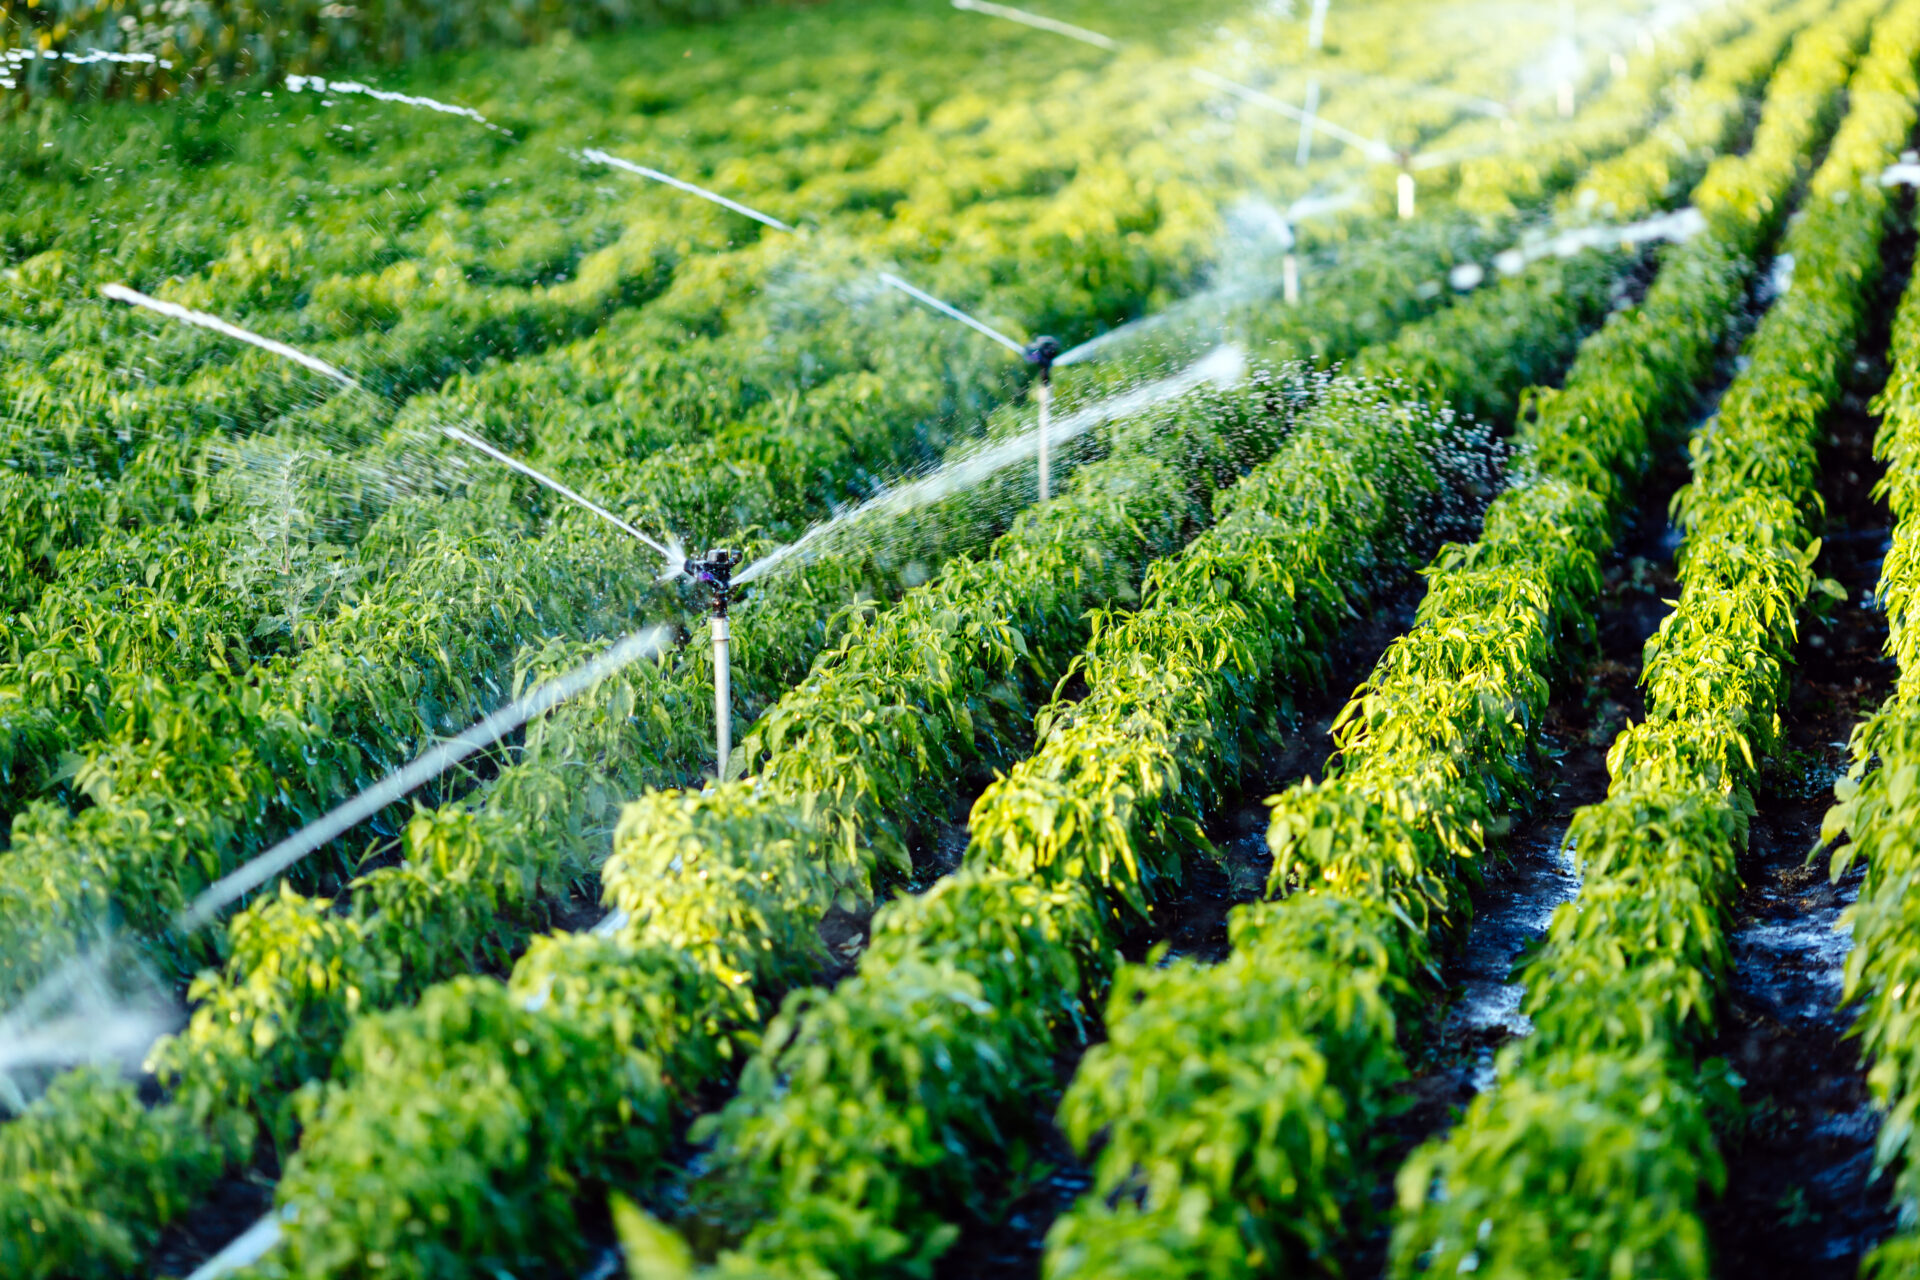 irrigation system watering agricultural plants